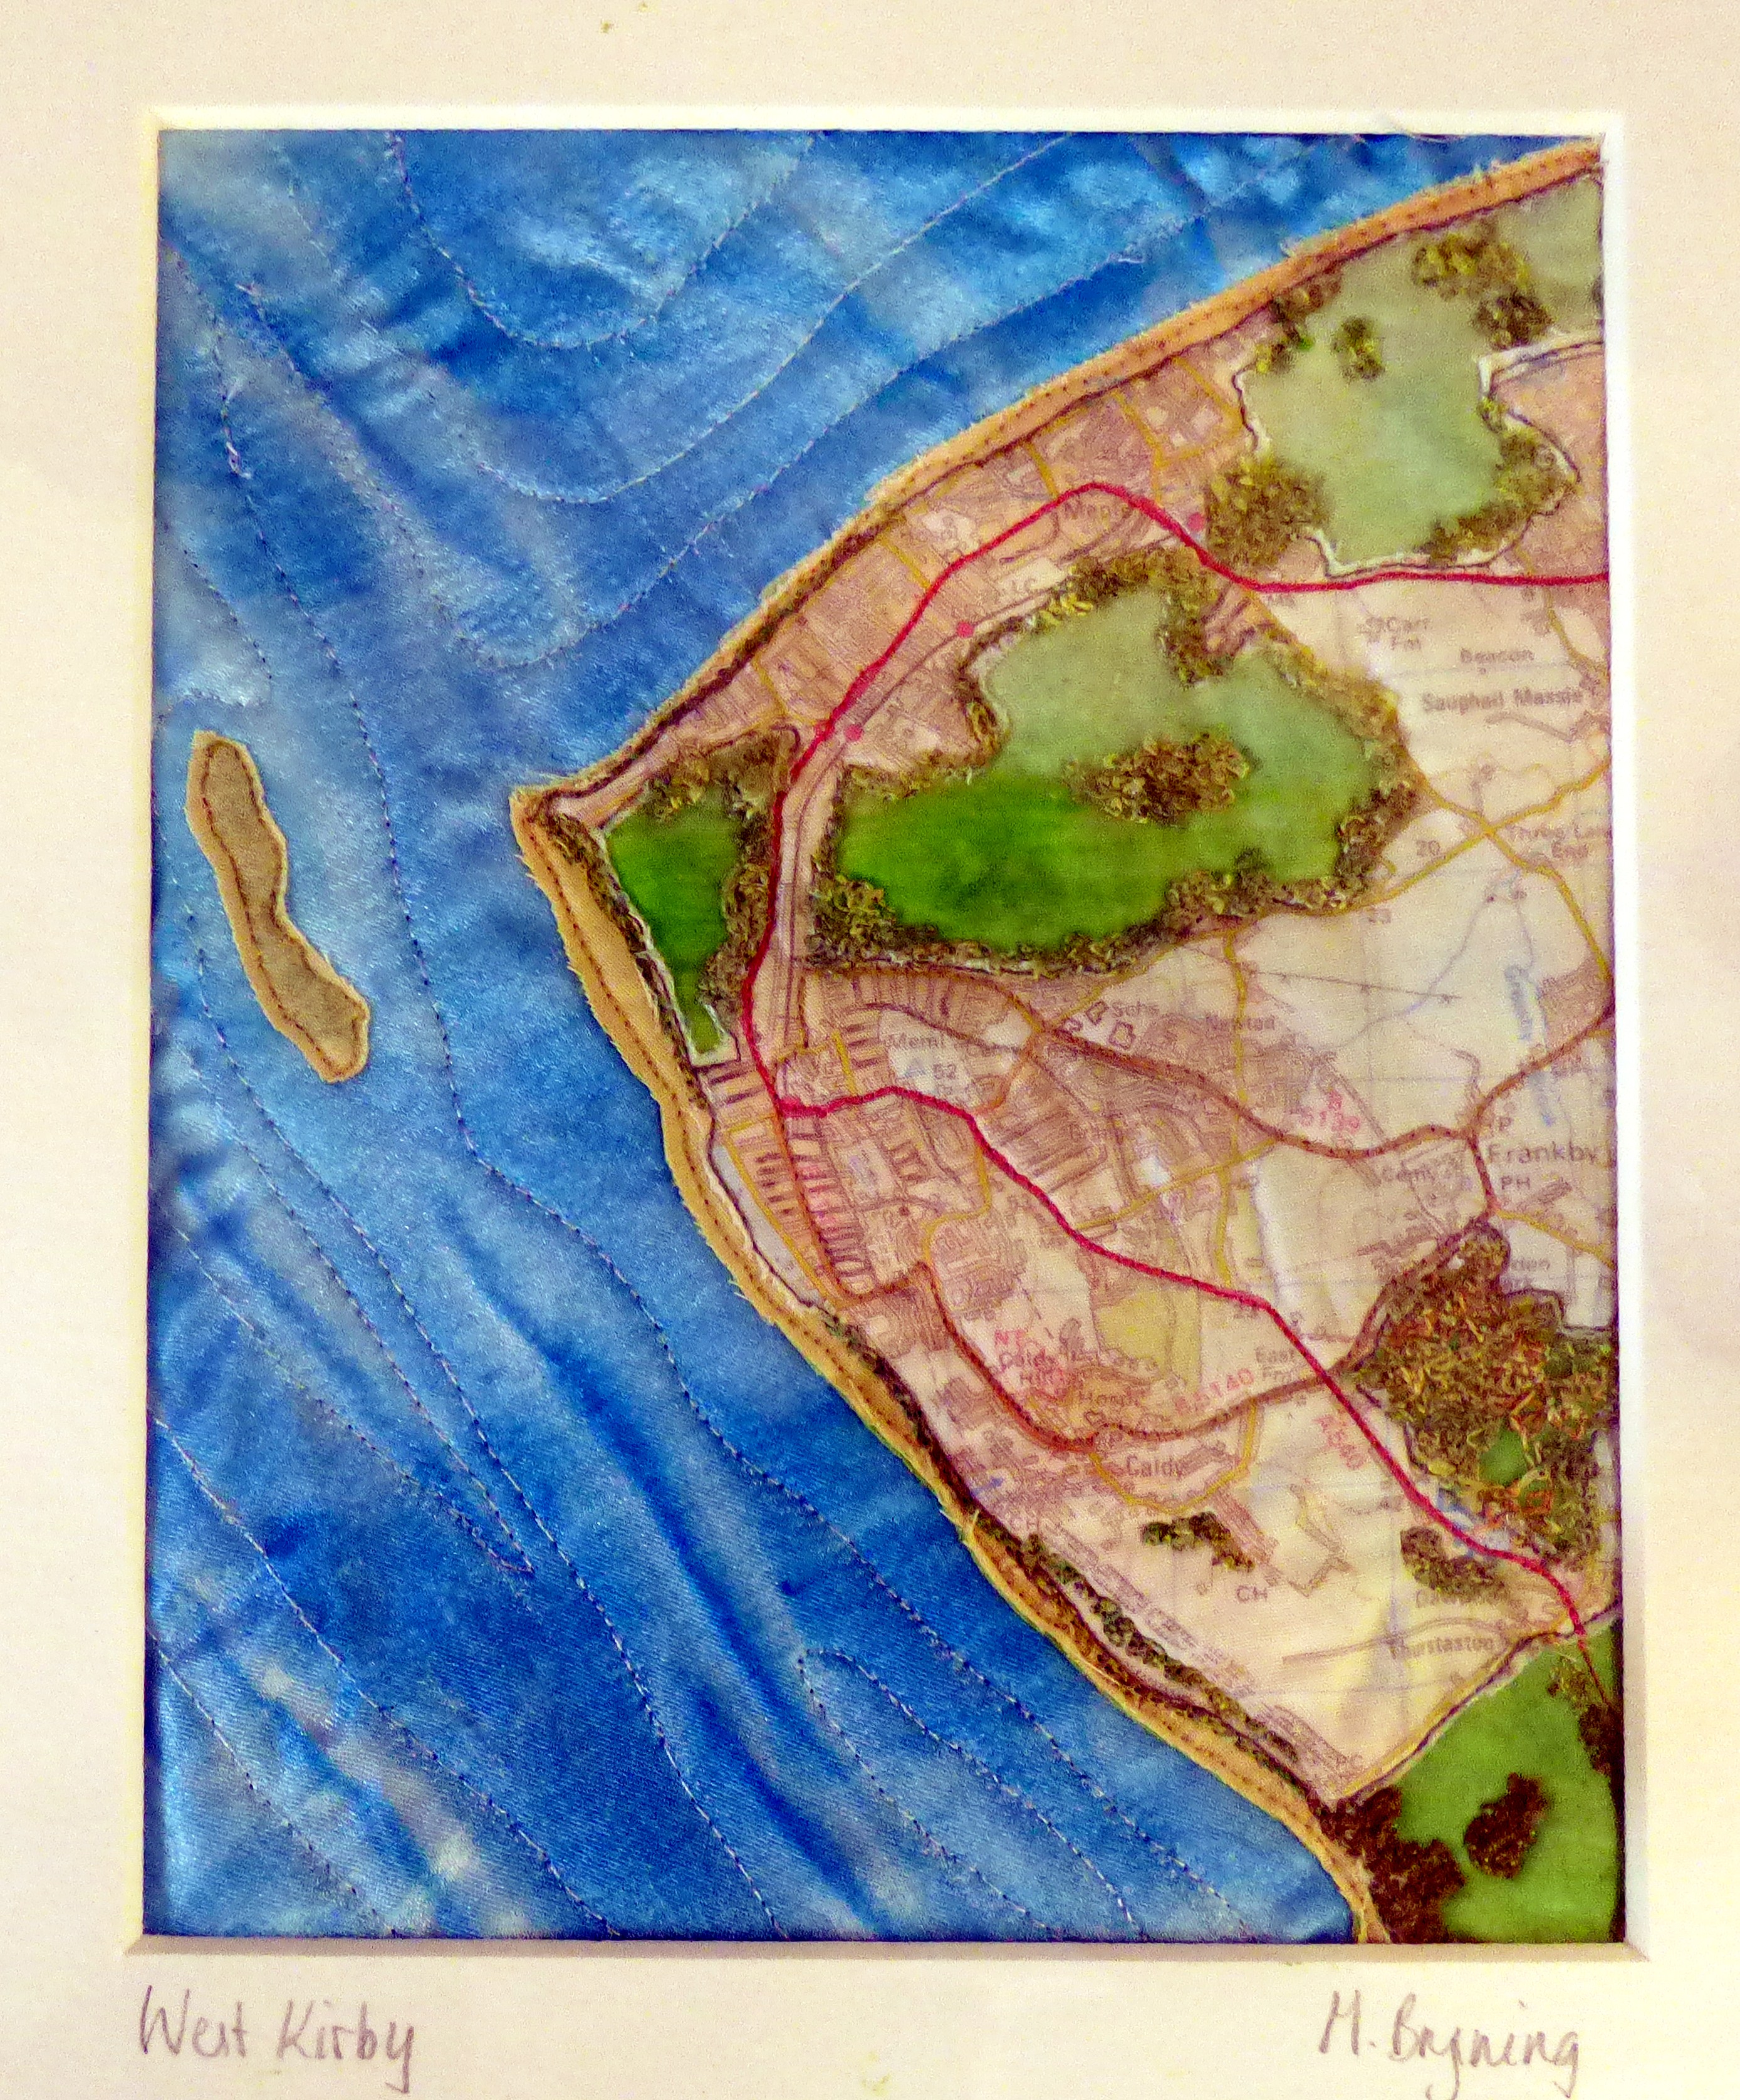 WEST KIRBY, embroidery by Mary Bryning at "Maps in Stitch" Talk by Mary Bryning, October 2023